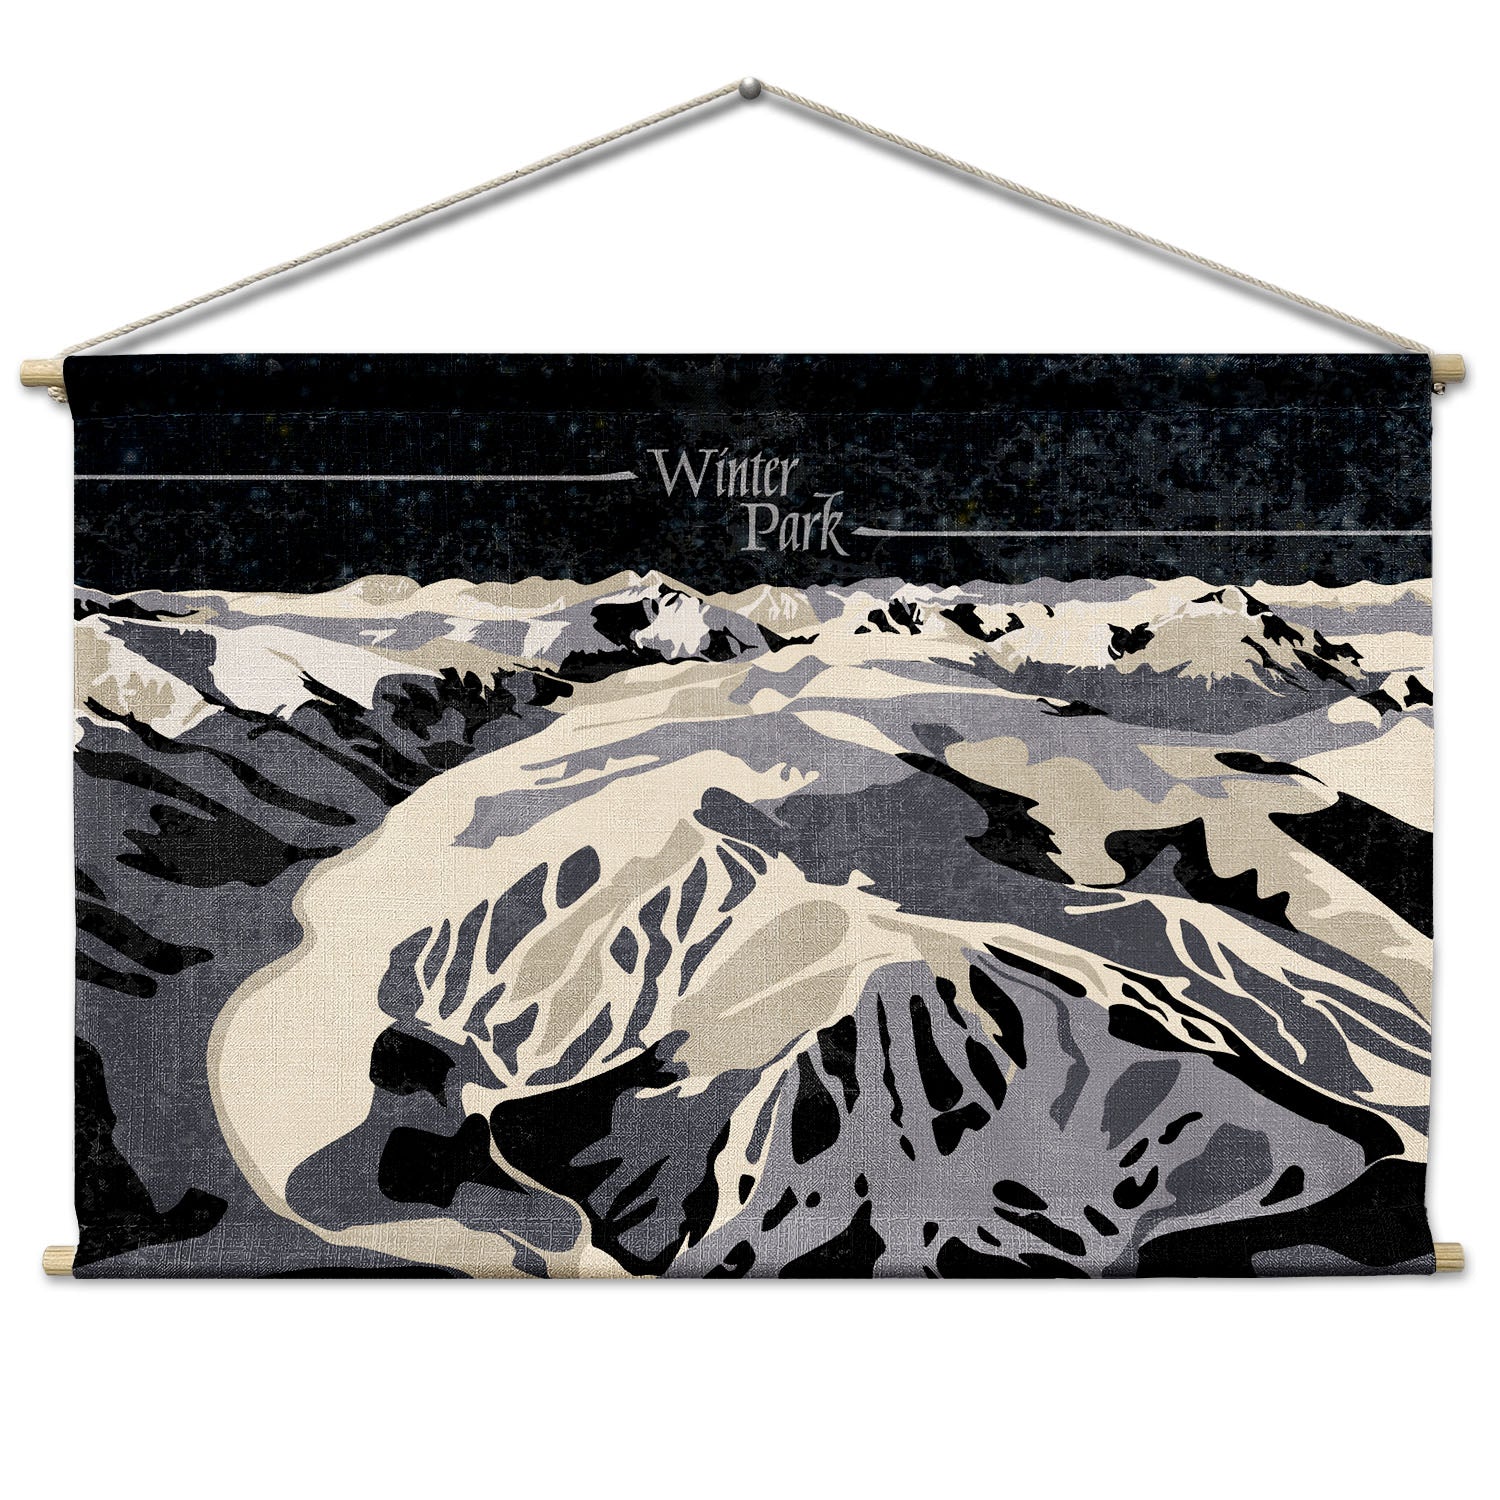 Winter Park Abstract Landscape Wall Hanging - Natural -  - Knotty Tie Co.